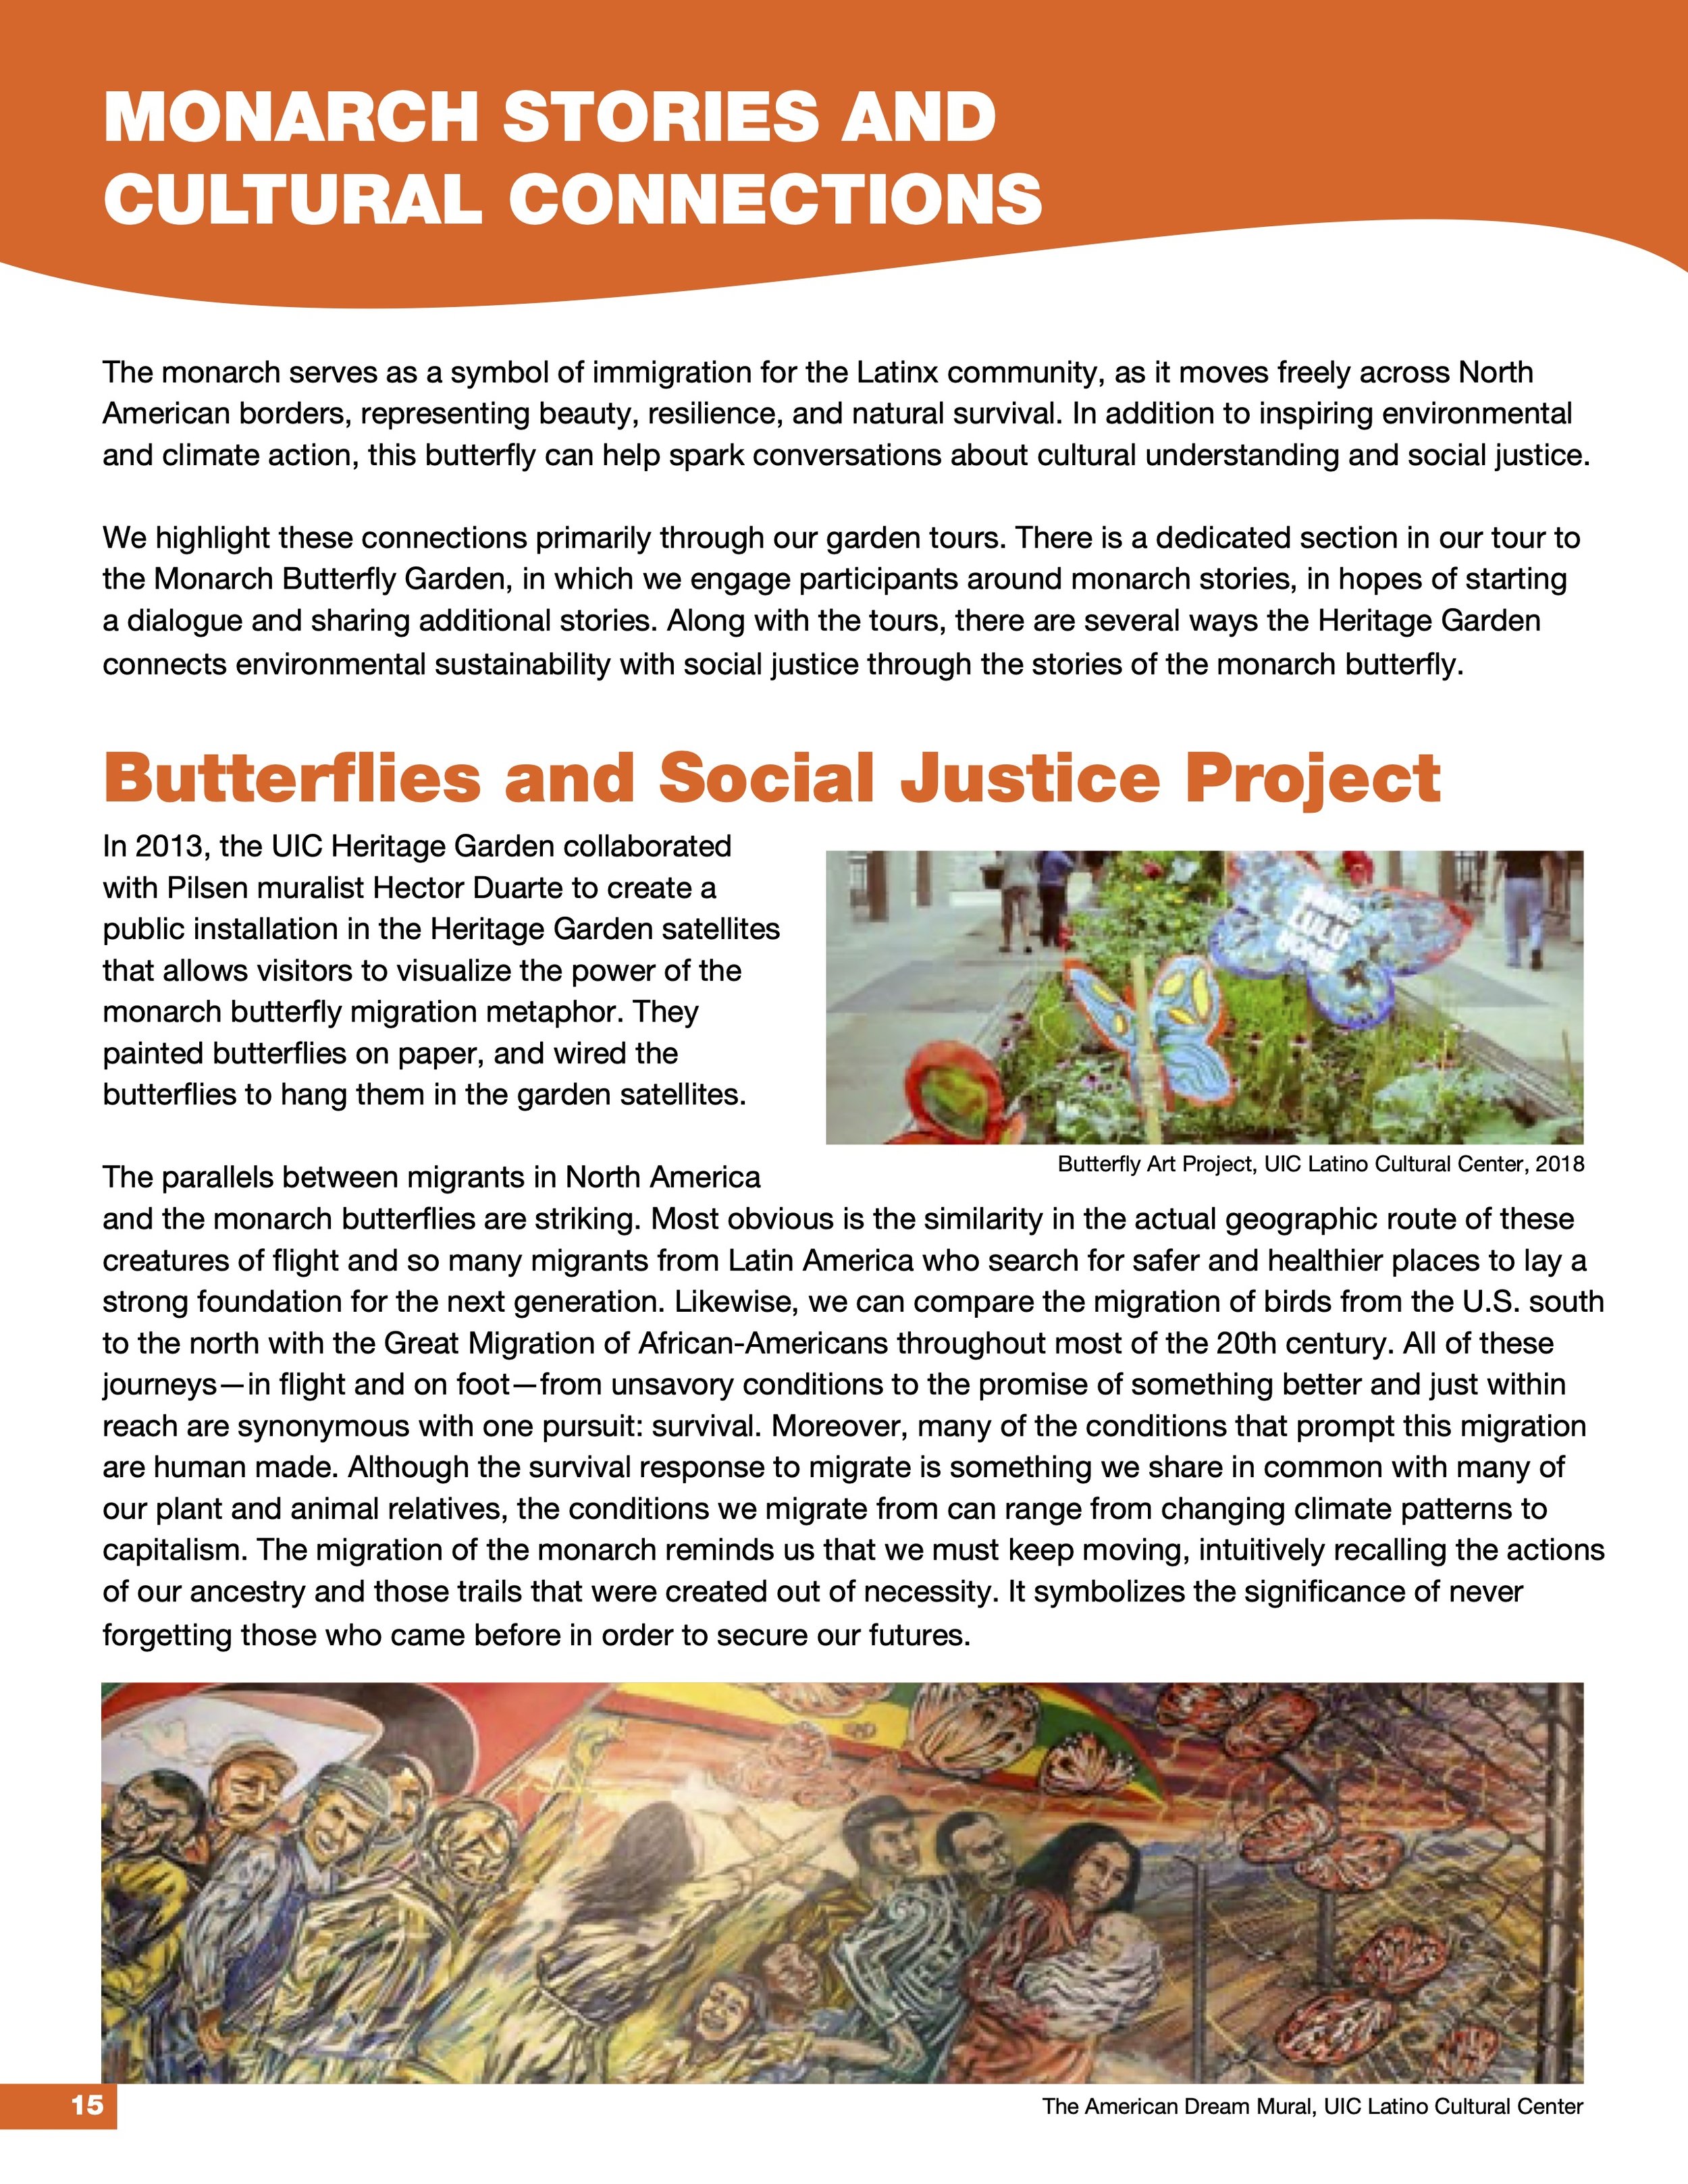 Butterflies and Social Justice